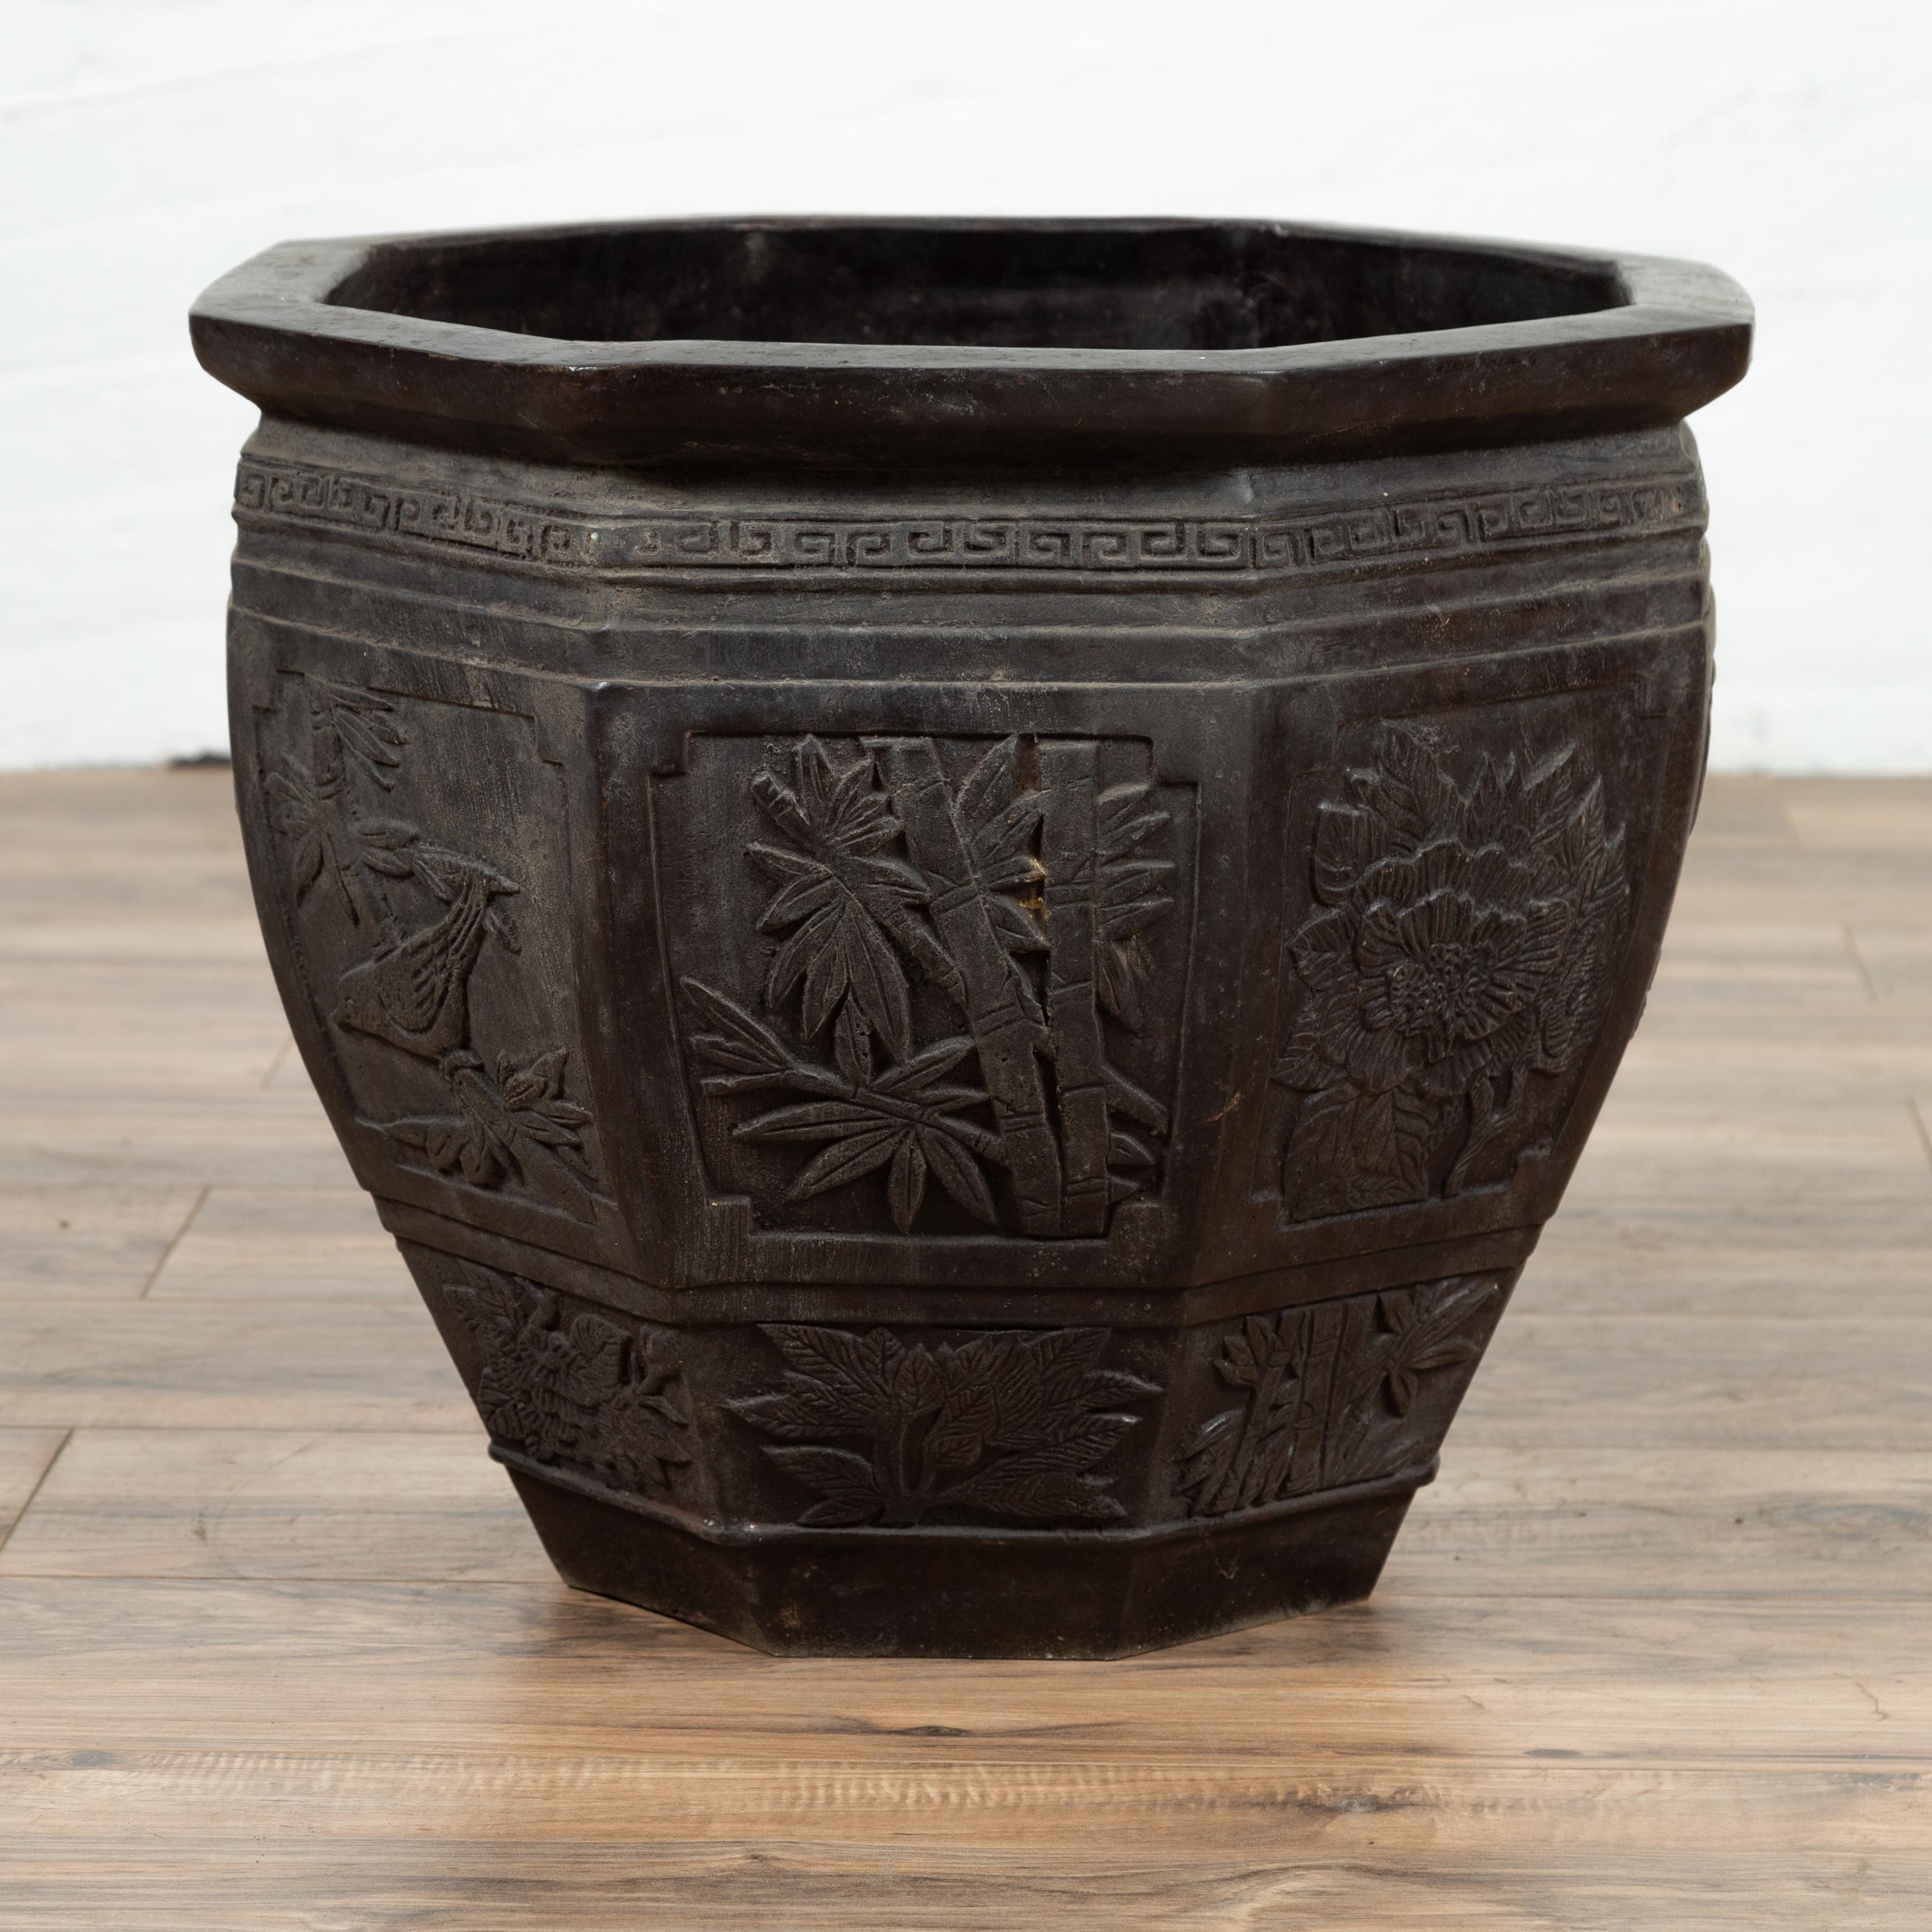 20th Century Vintage Asian Octagonal Bronze Planter with Floral, Foliage and Bird Motifs